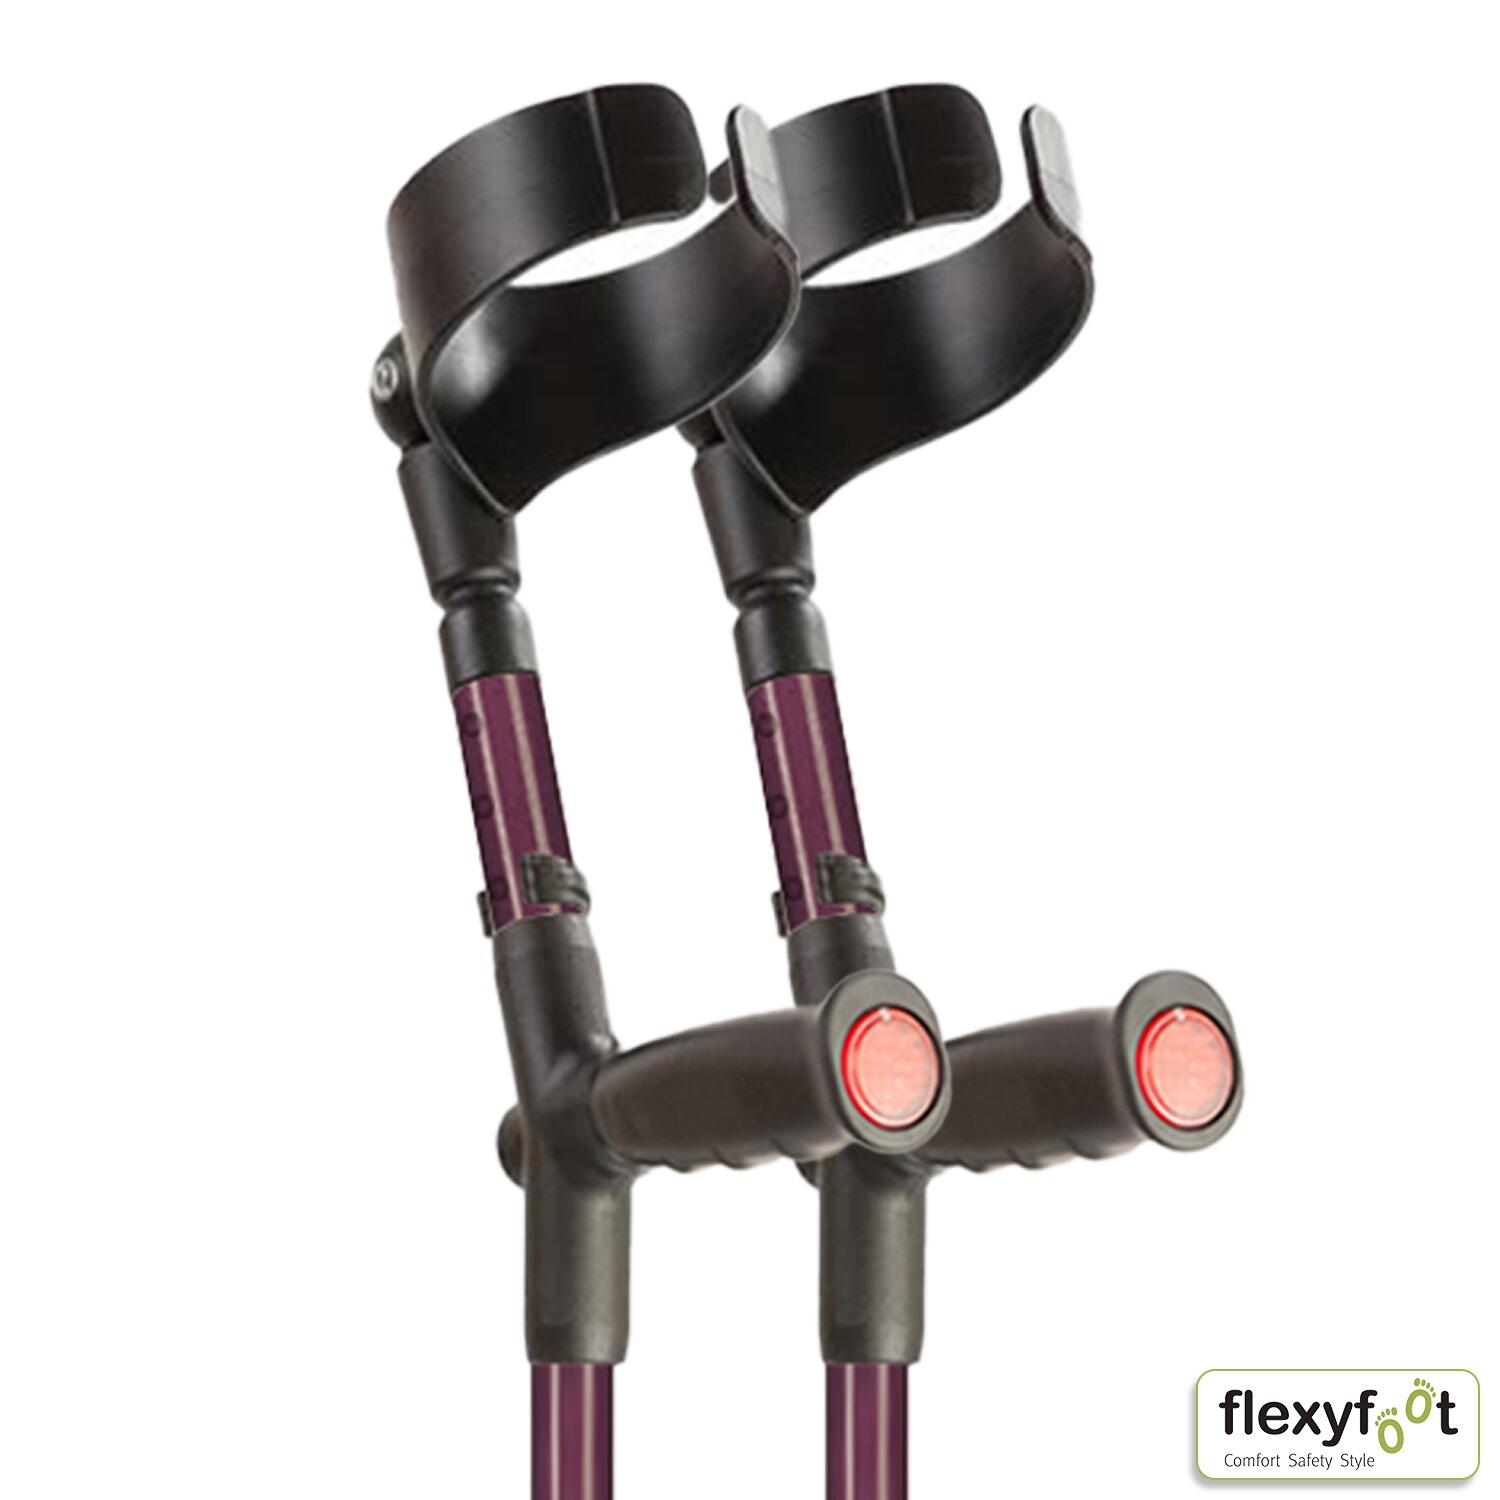 Flexyfoot Soft Grip Shock Absorbing Crutches - Blackberry - Closed Cuff and Handle